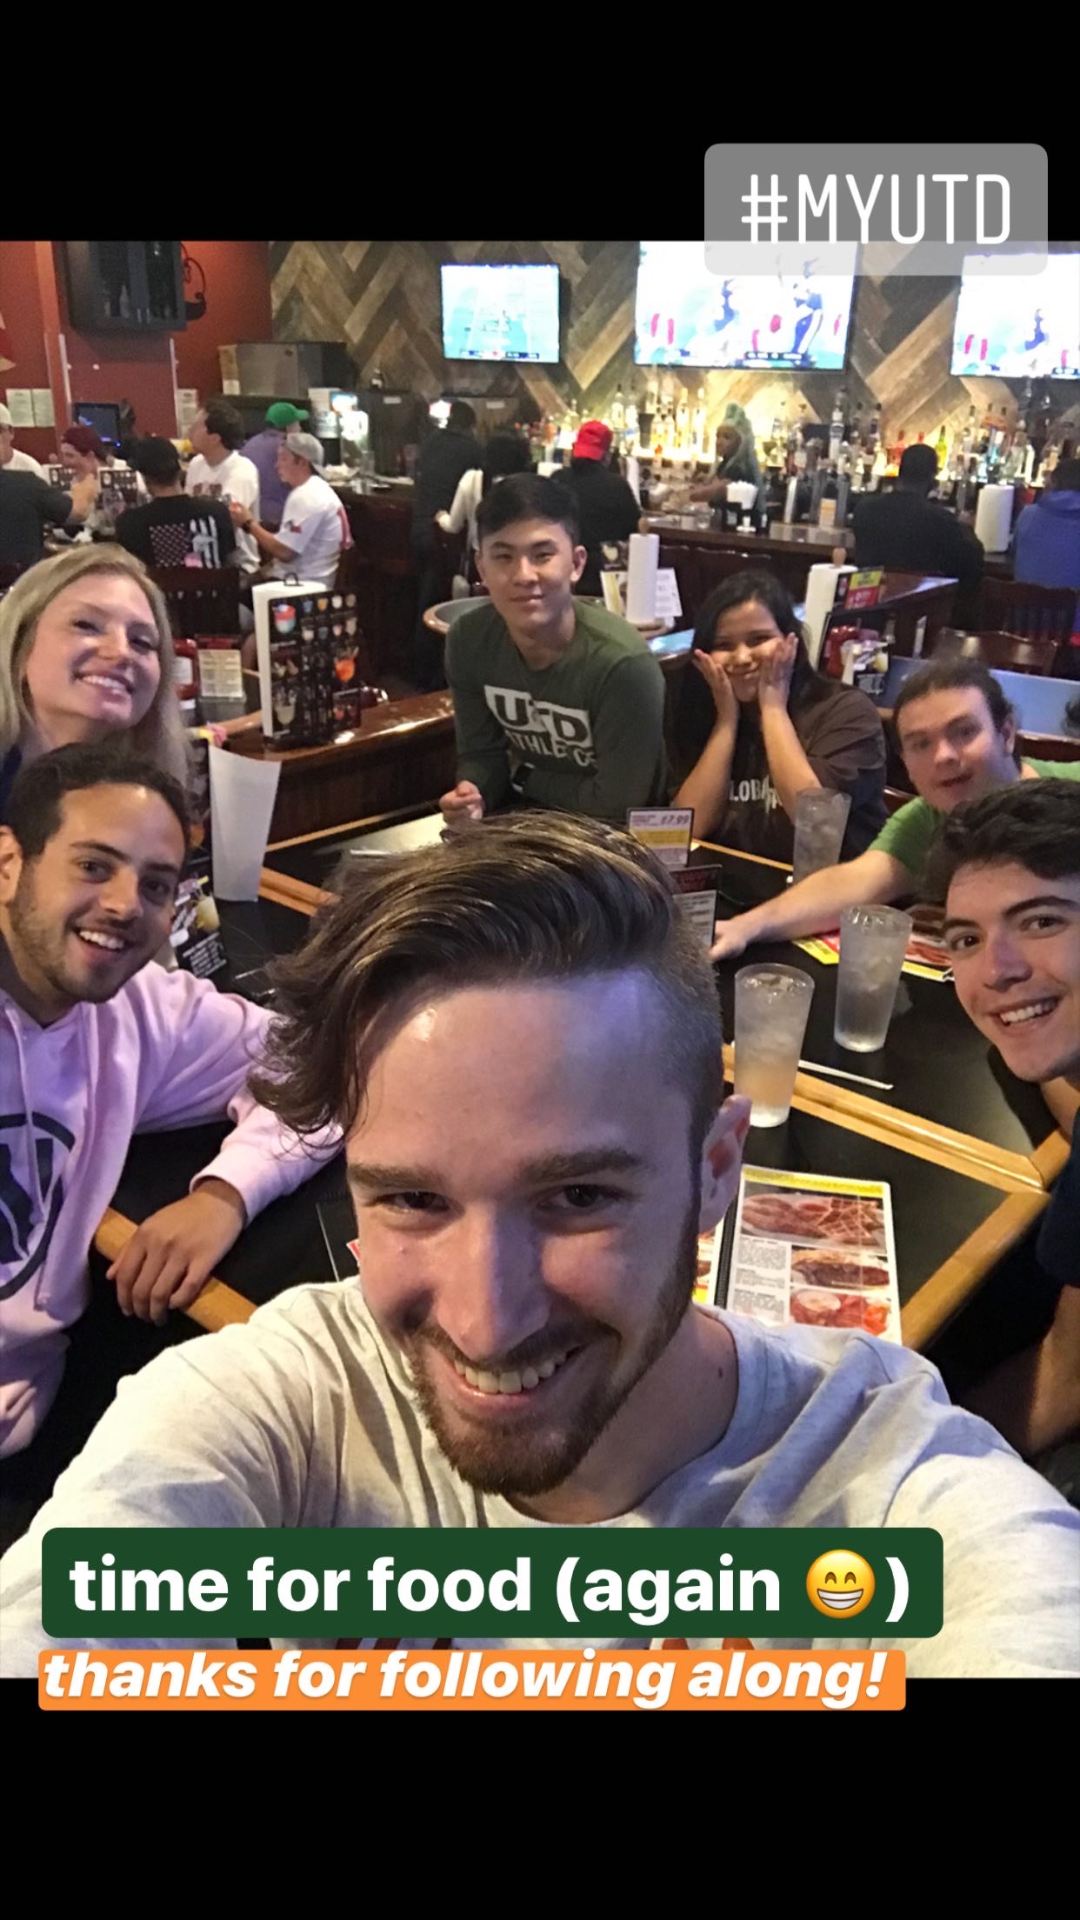  Garrett taking a selfie in a restaurant with a group of friends behind him.